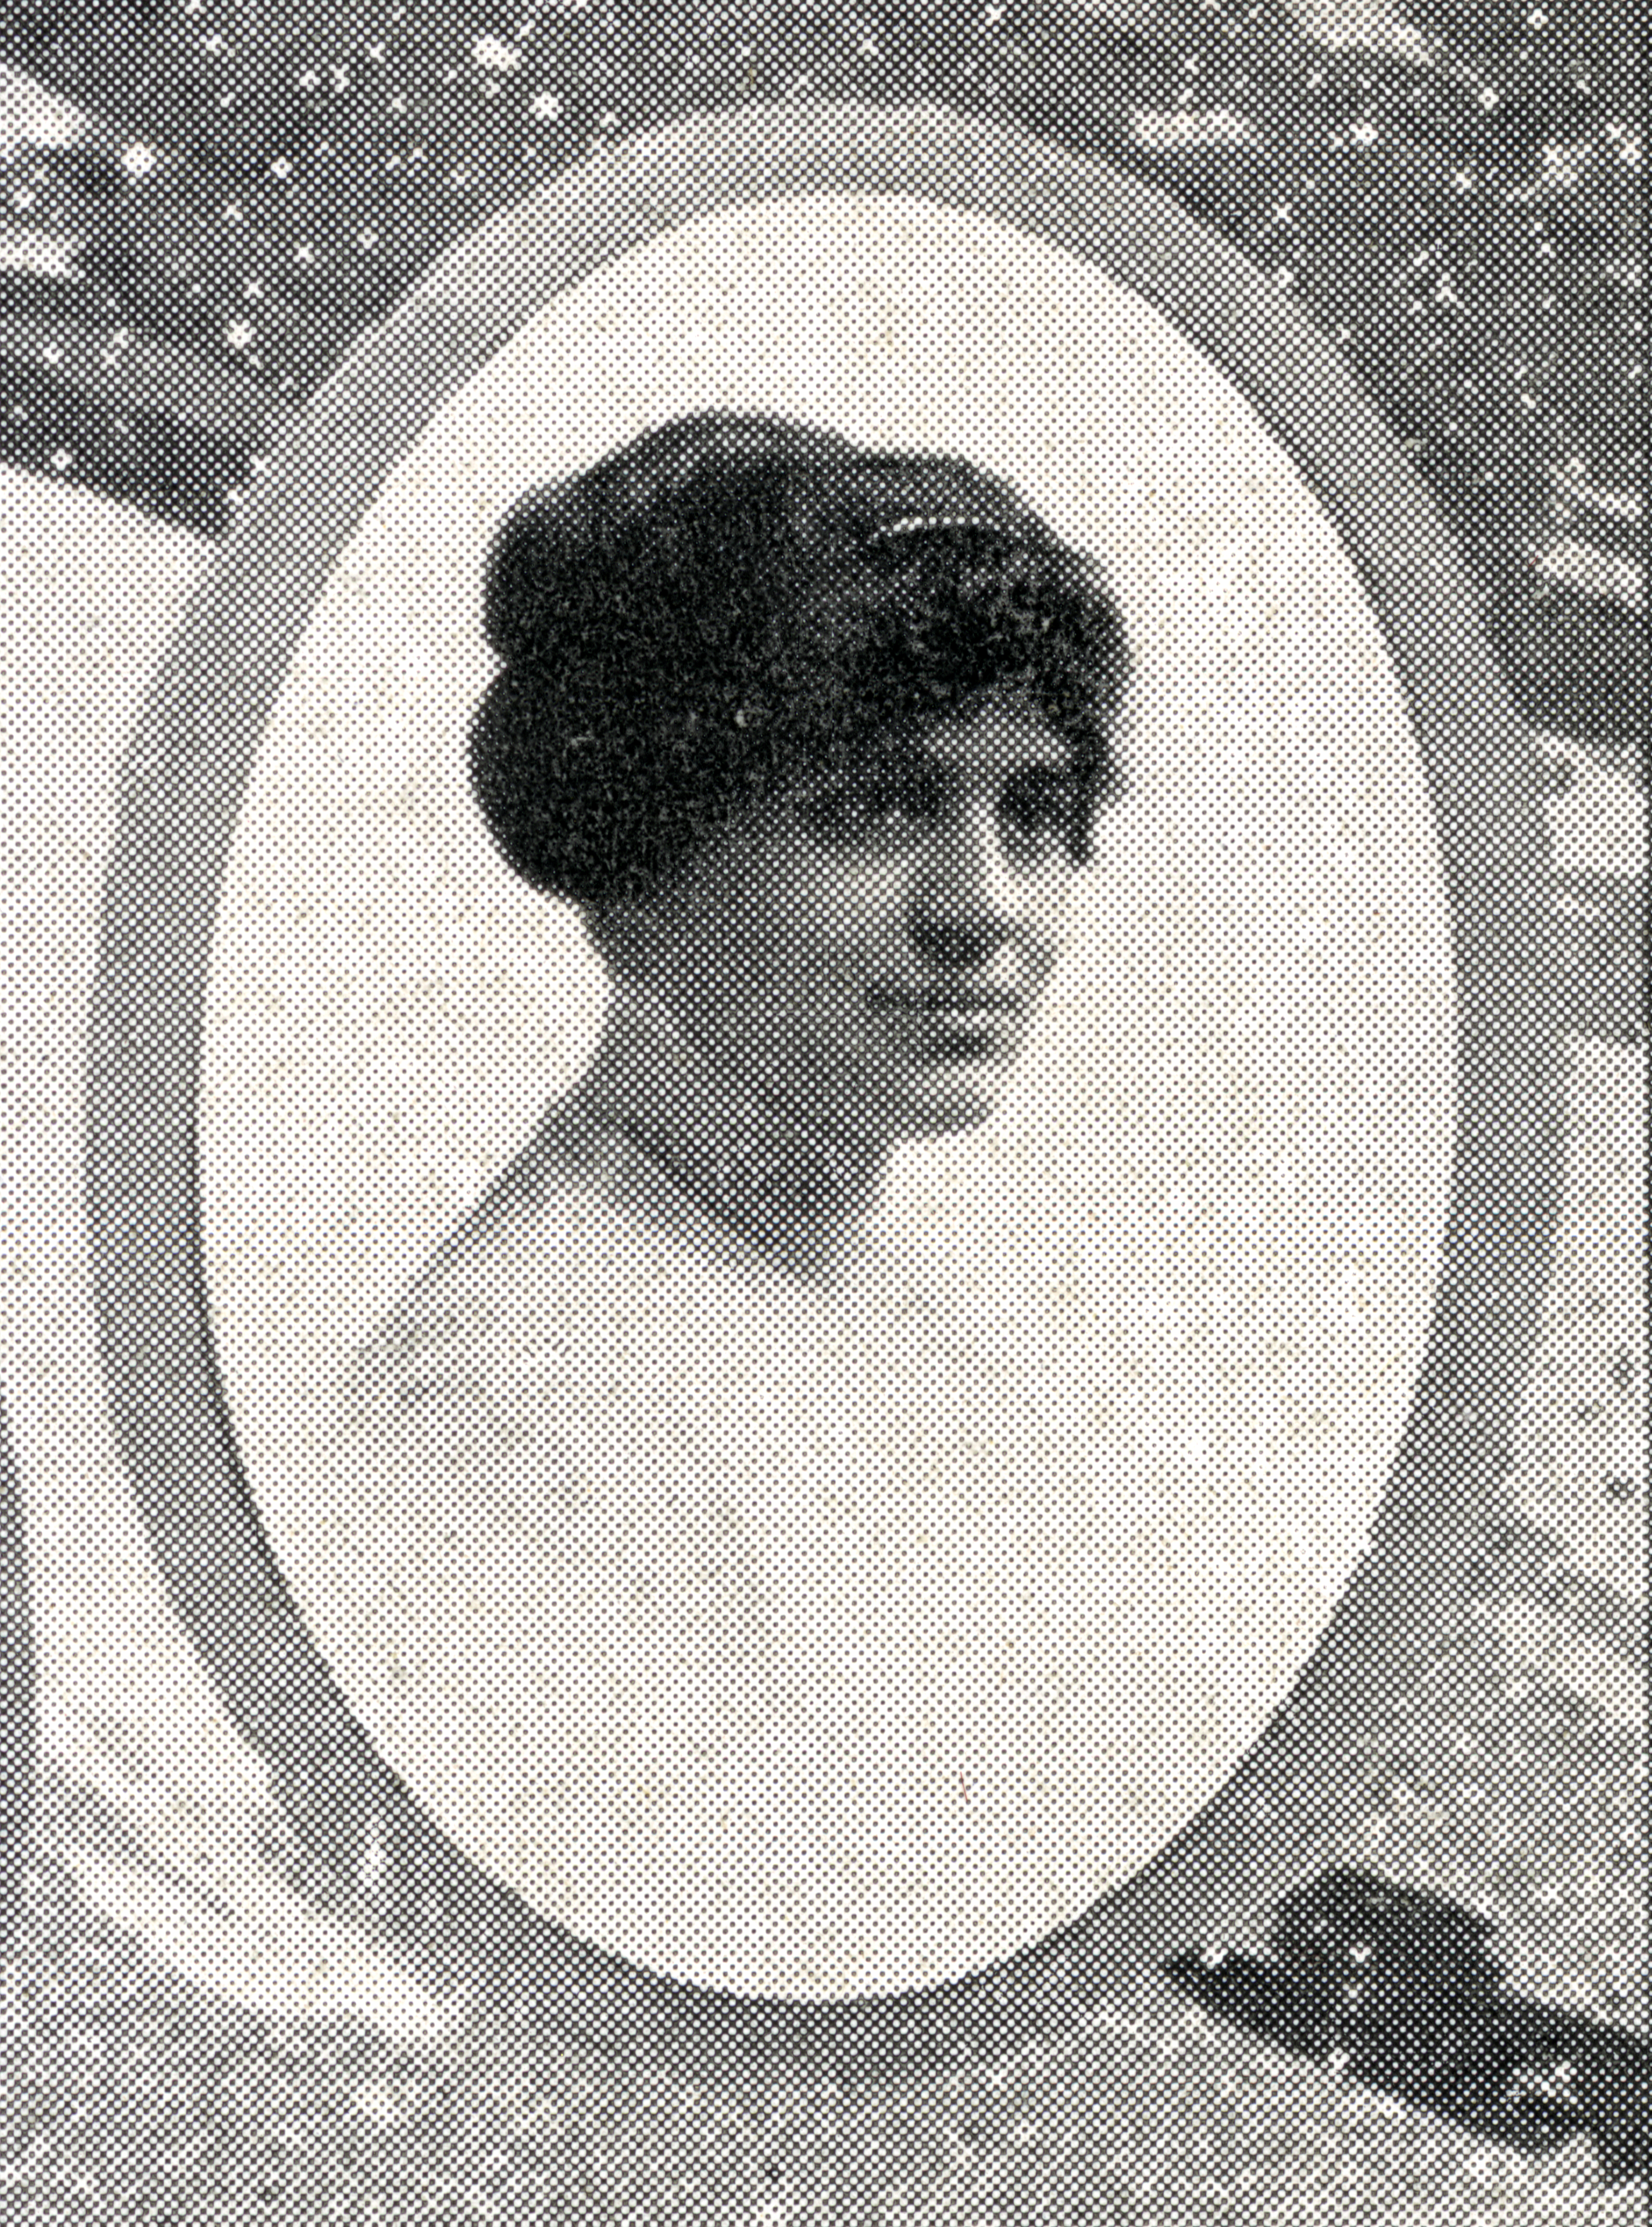 Maude Evelyn Talbott, image provided by the Bentley Historical Library, The University of Michigan